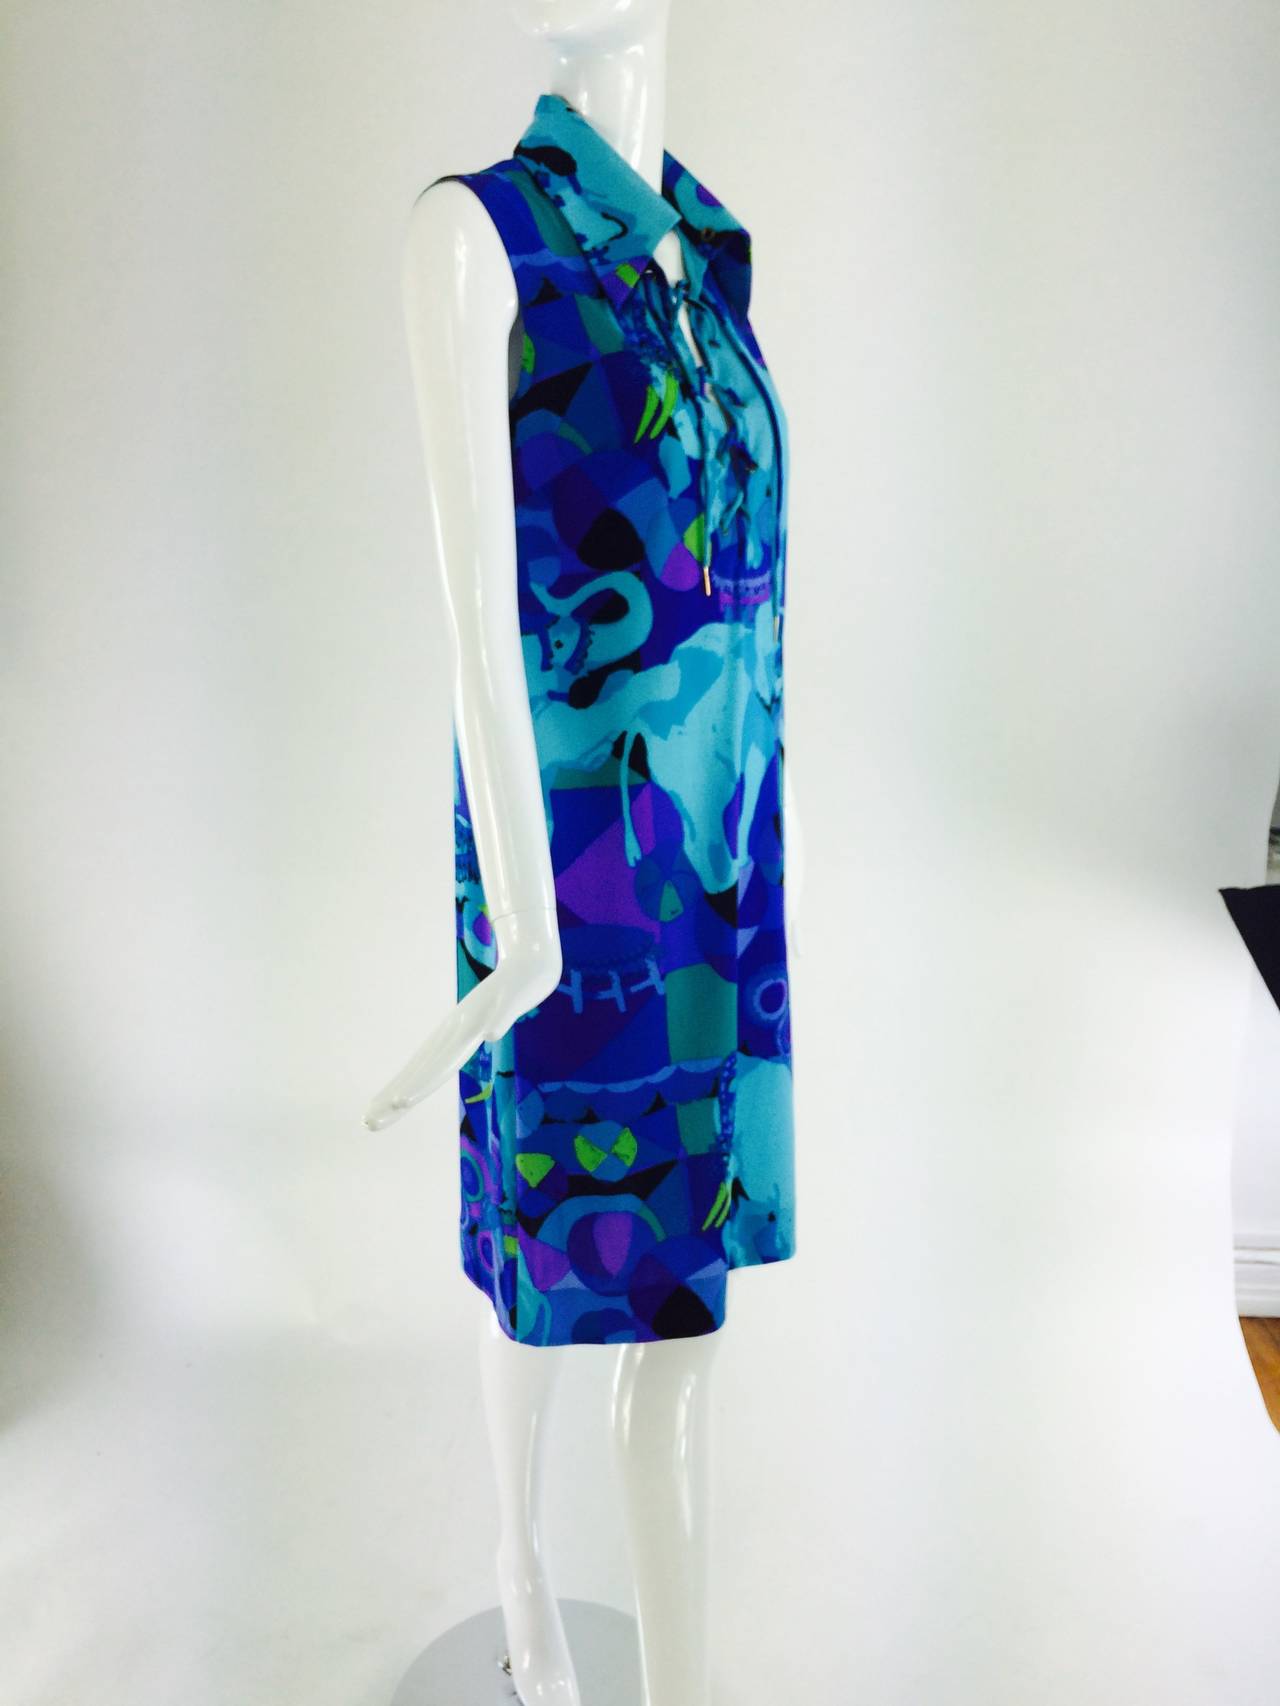 Ken Scott safari style dress from the 1970s in a wonderful print done in shades of purple, aqua, burgundy, teal & chartreuse, fabric designed by Susan Nevelson who still designs prints for Ken Scott (who passed away in 1991) Ken Scott's company is